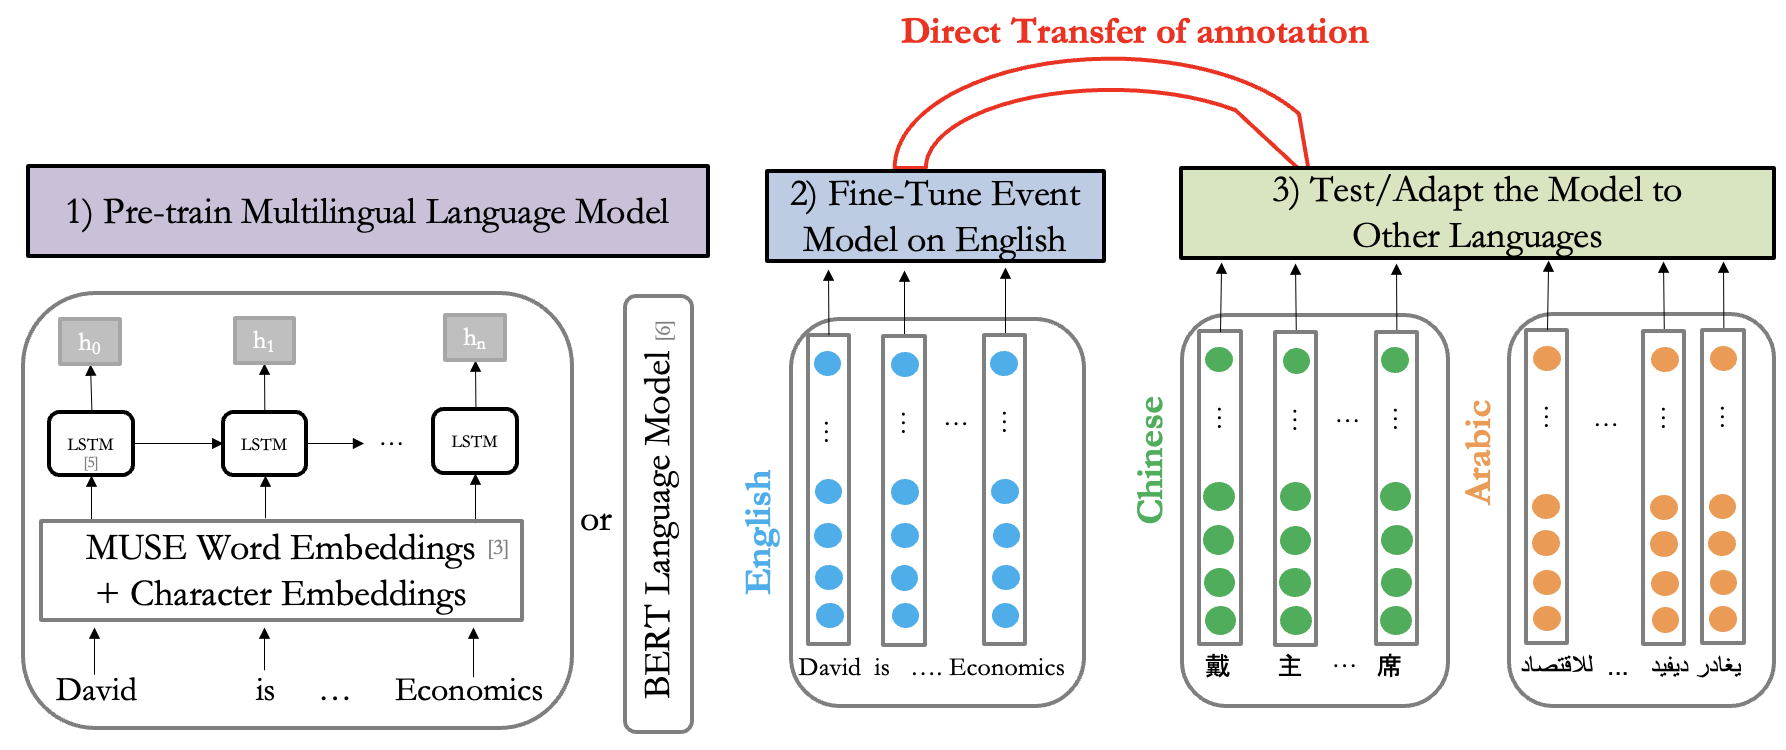 Cross-lingual Direct Transfer of Annotation